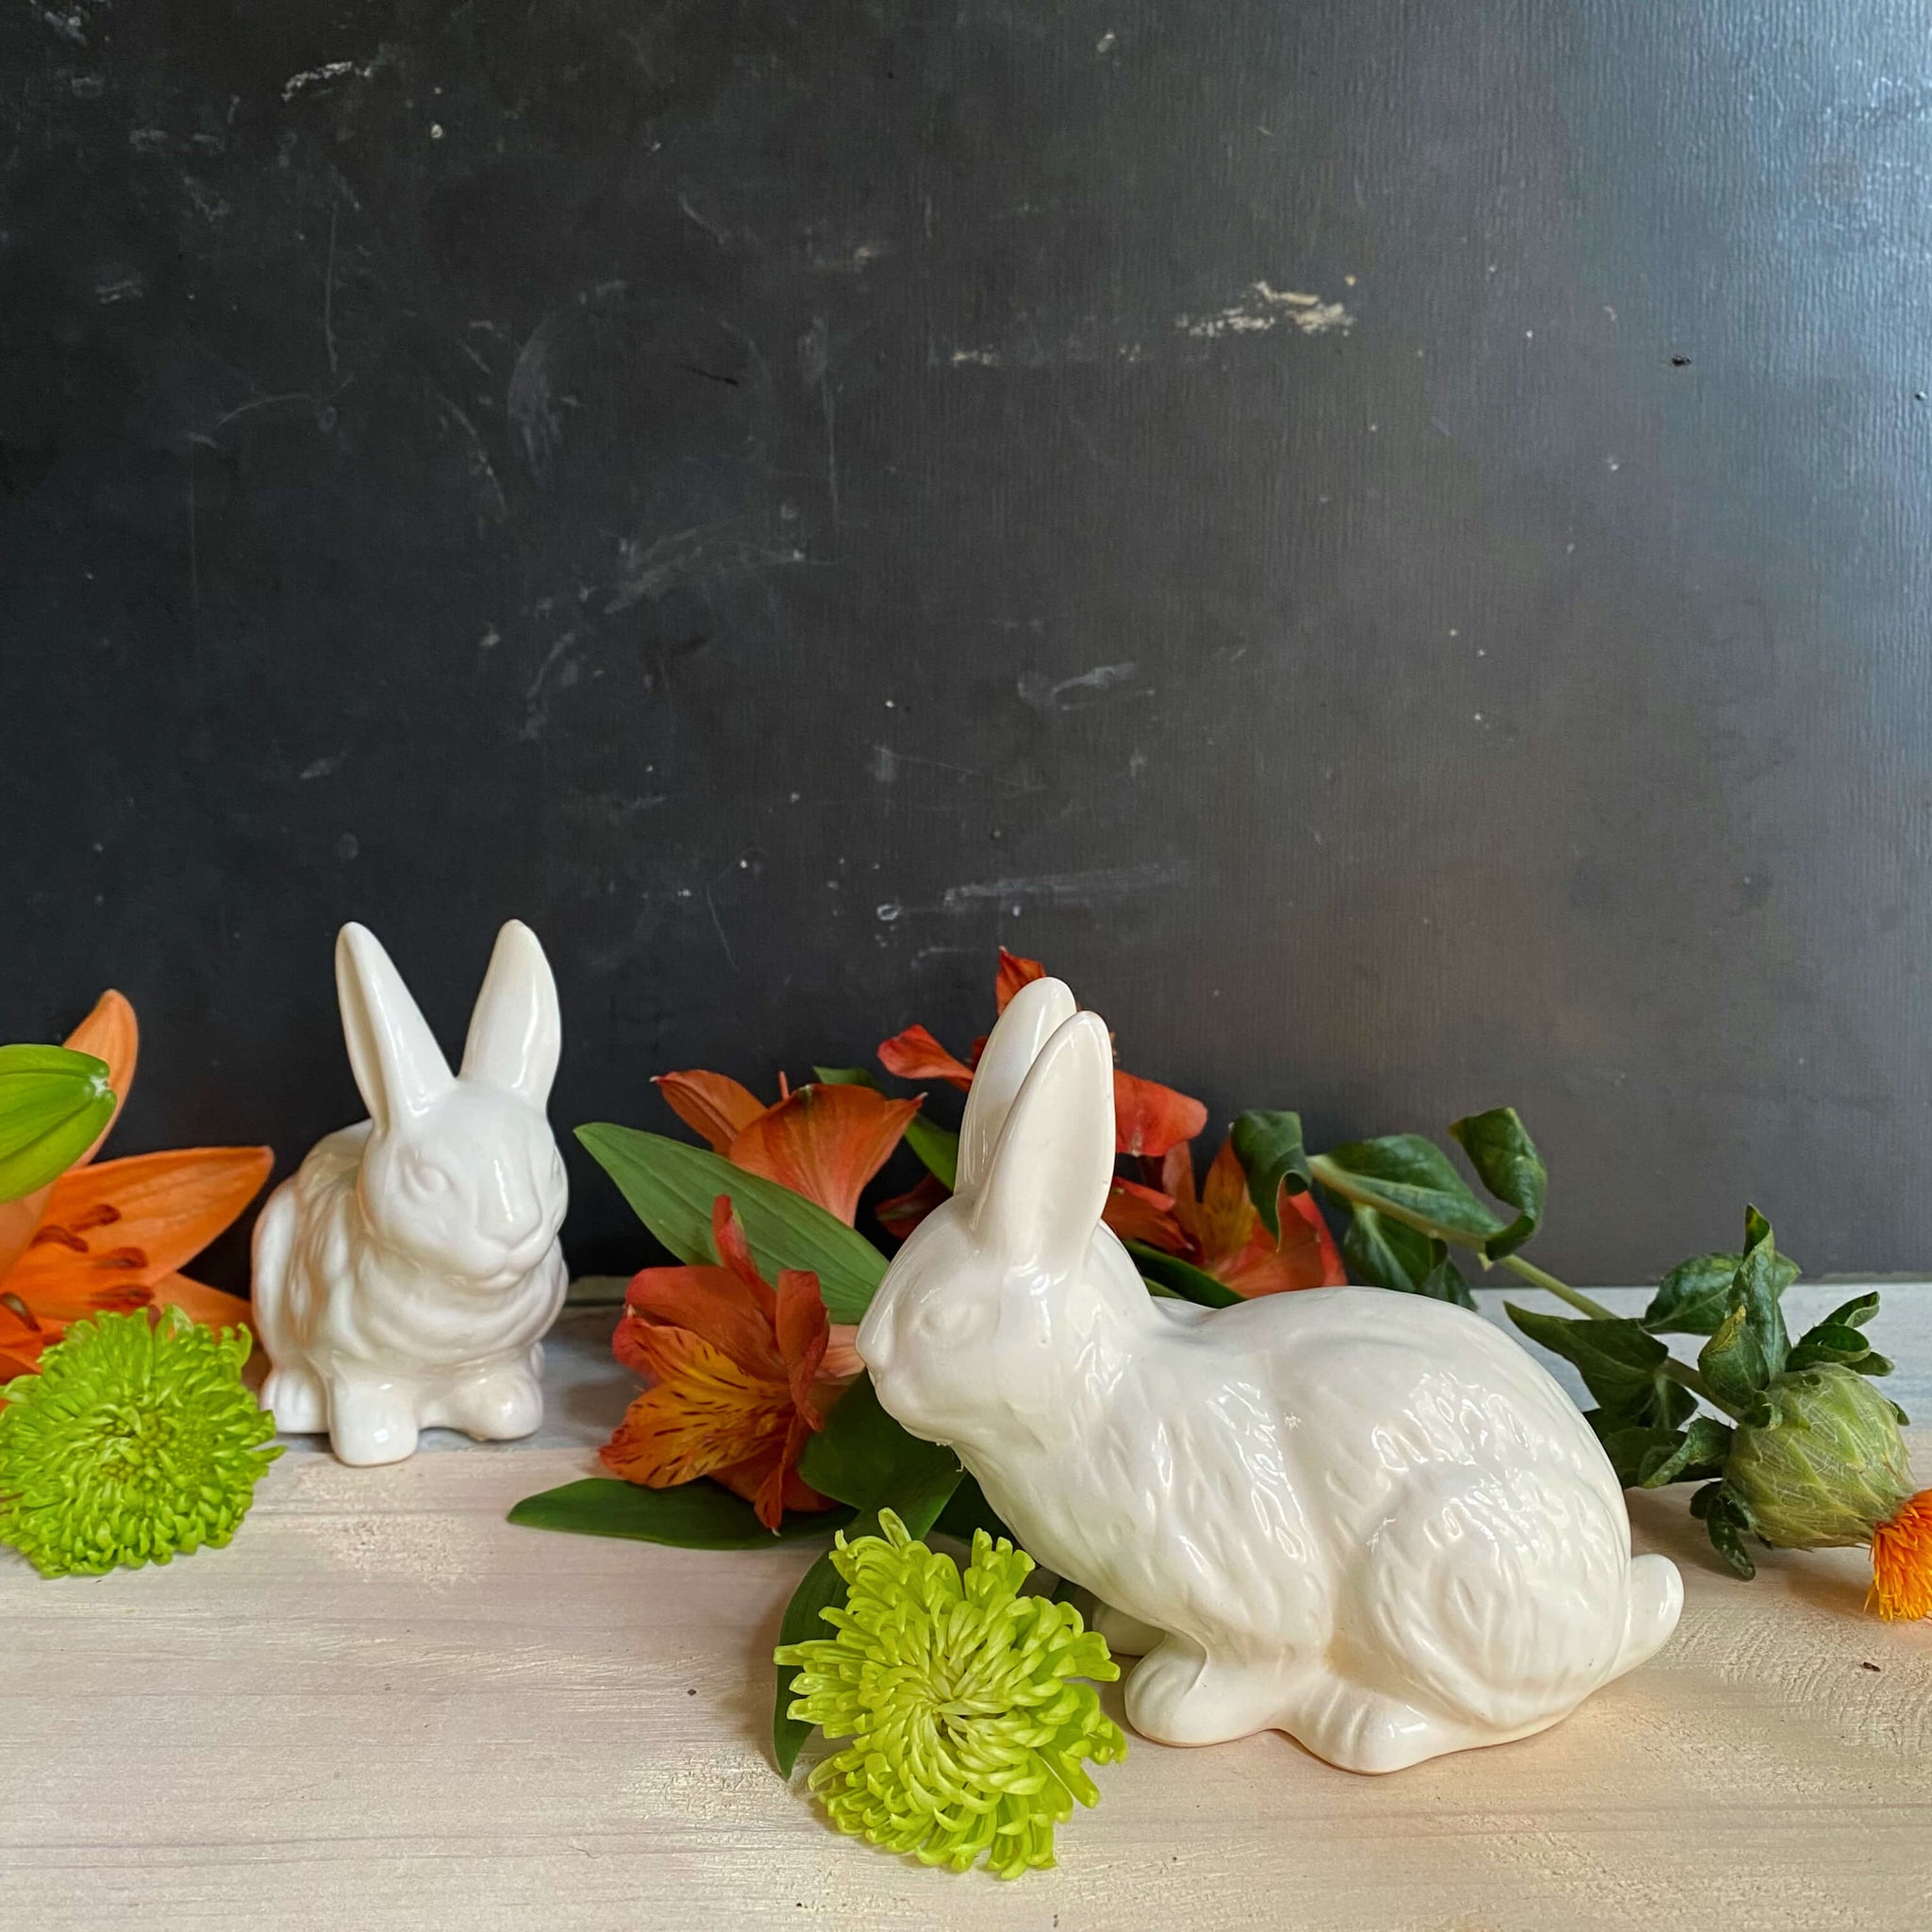 Vintage Pair of Ceramic White Bunny Rabbits by Midwest Taiwan circa 1980s-1990s